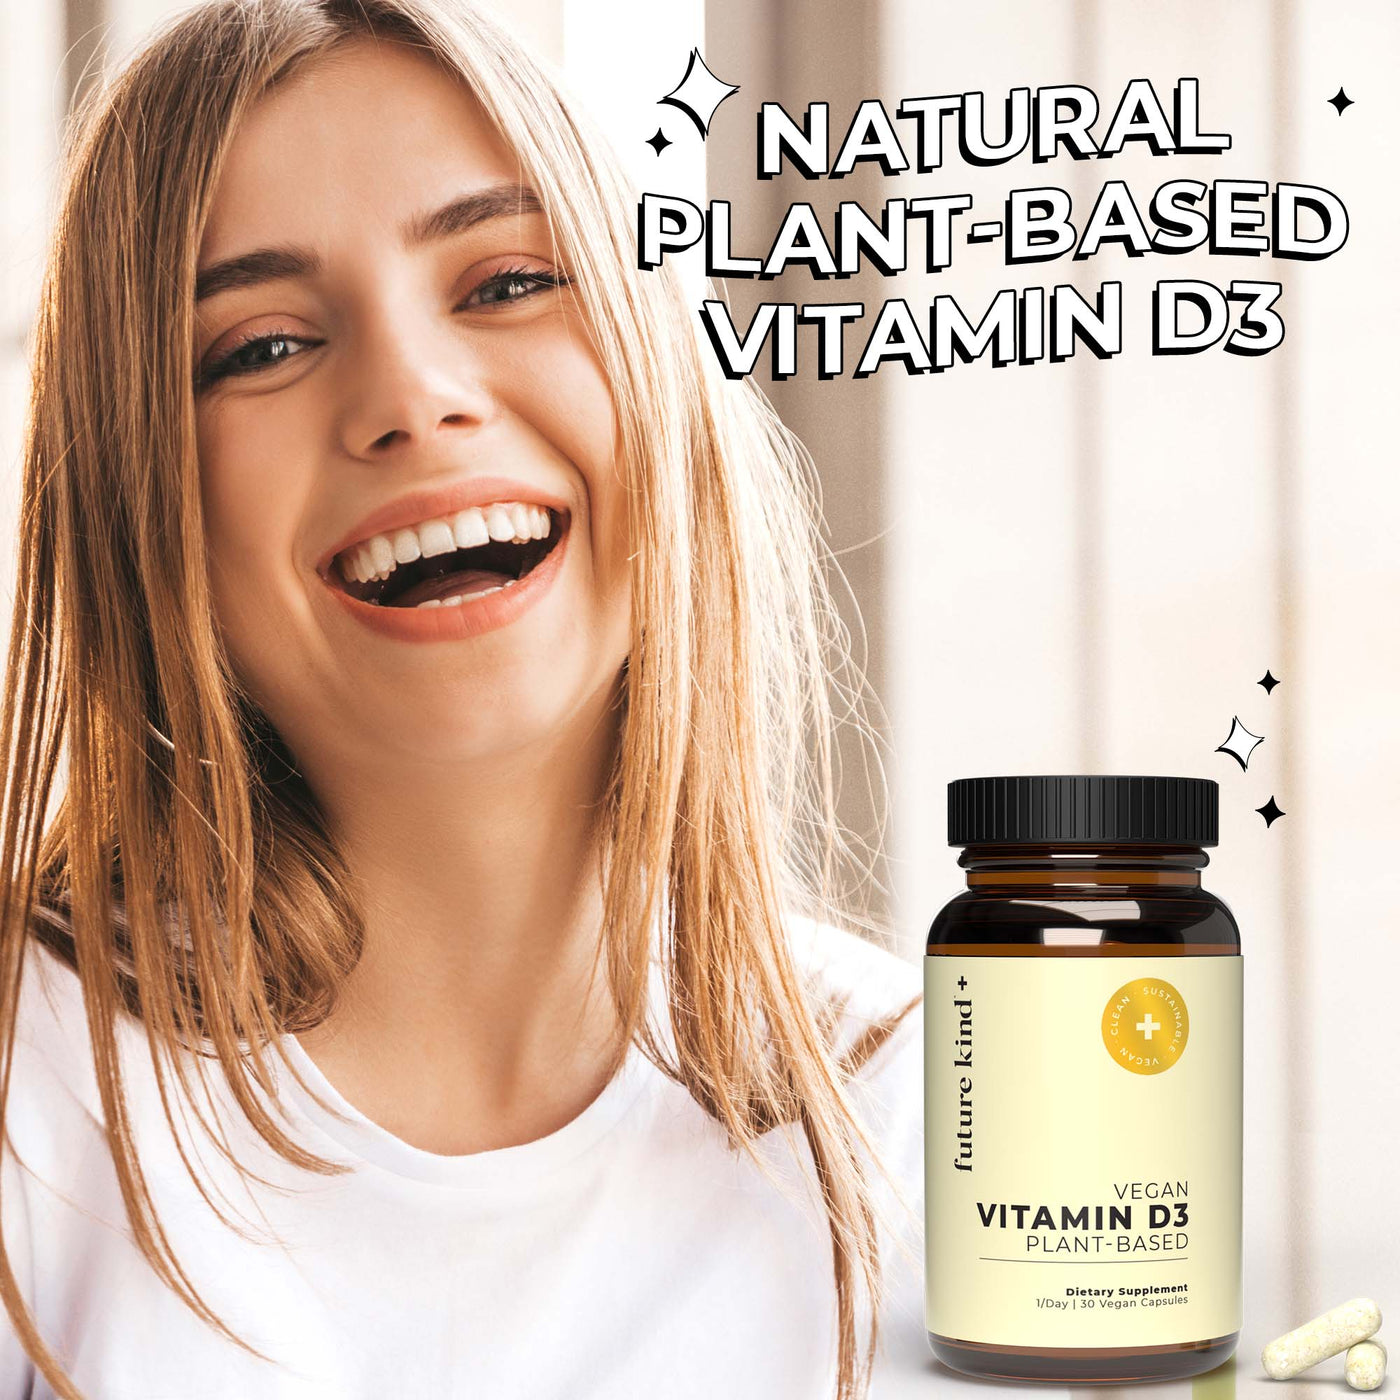 Future Kind Vitamin D3 Supplement Natural Ingredients Feature With Woman